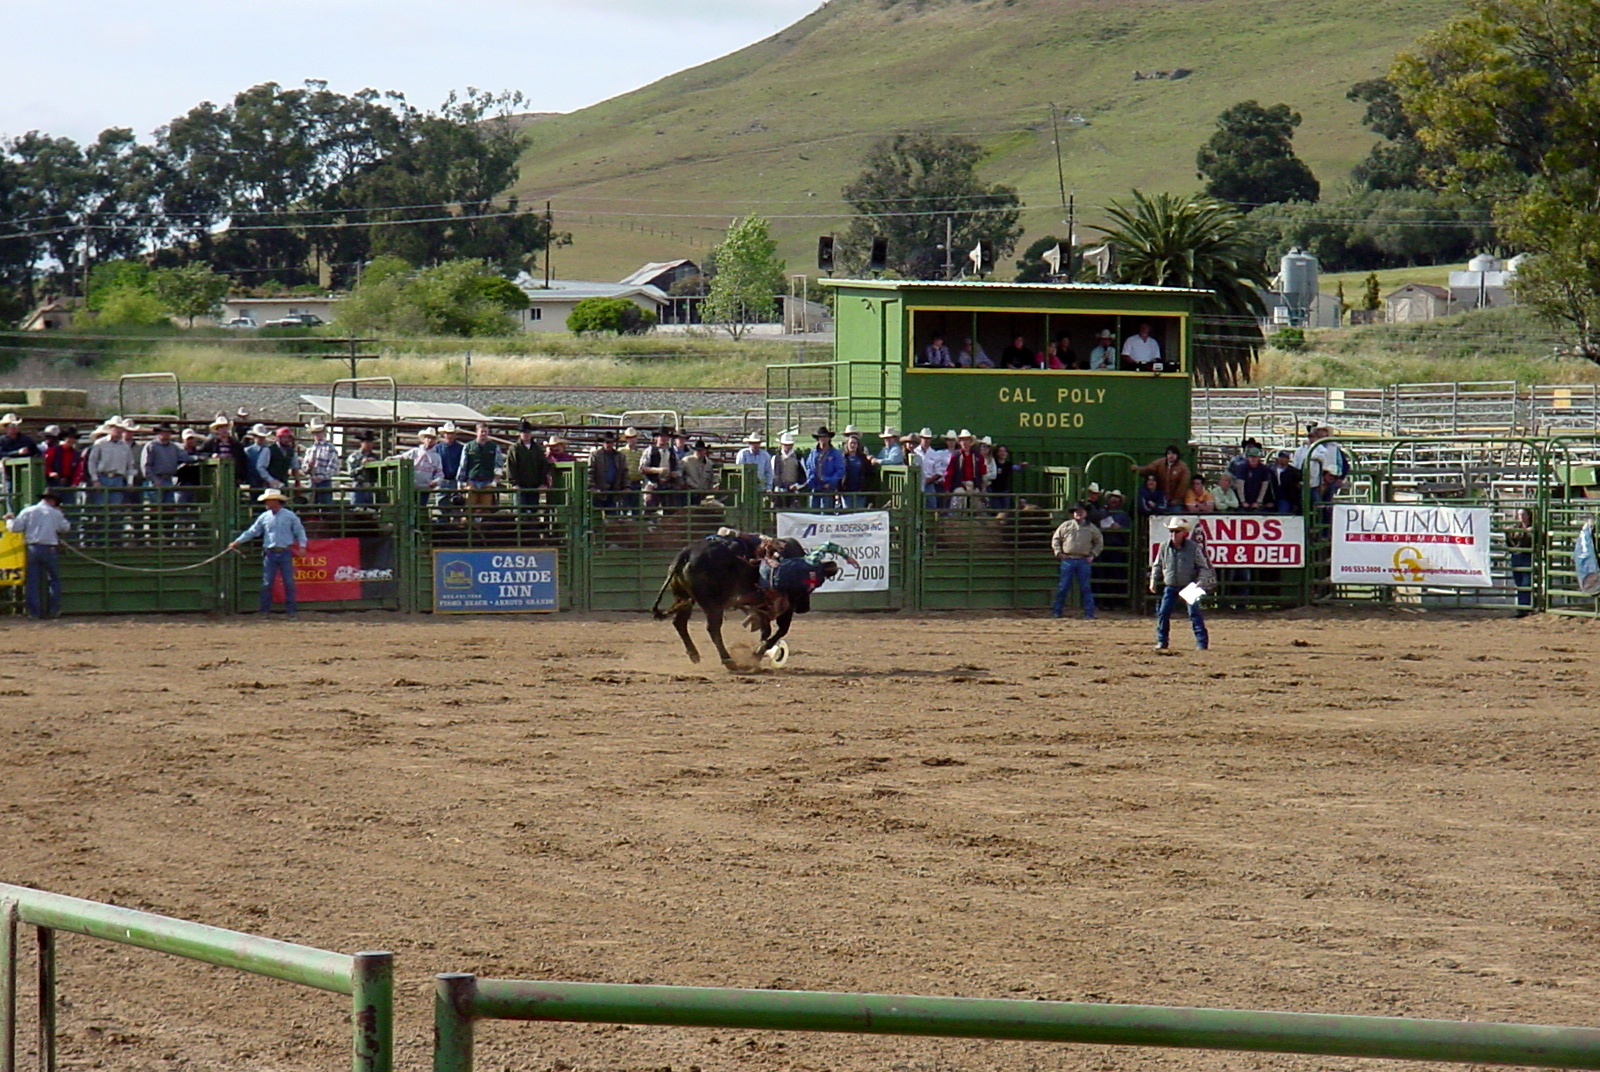 there is a bull being thrown to a rodeo rider